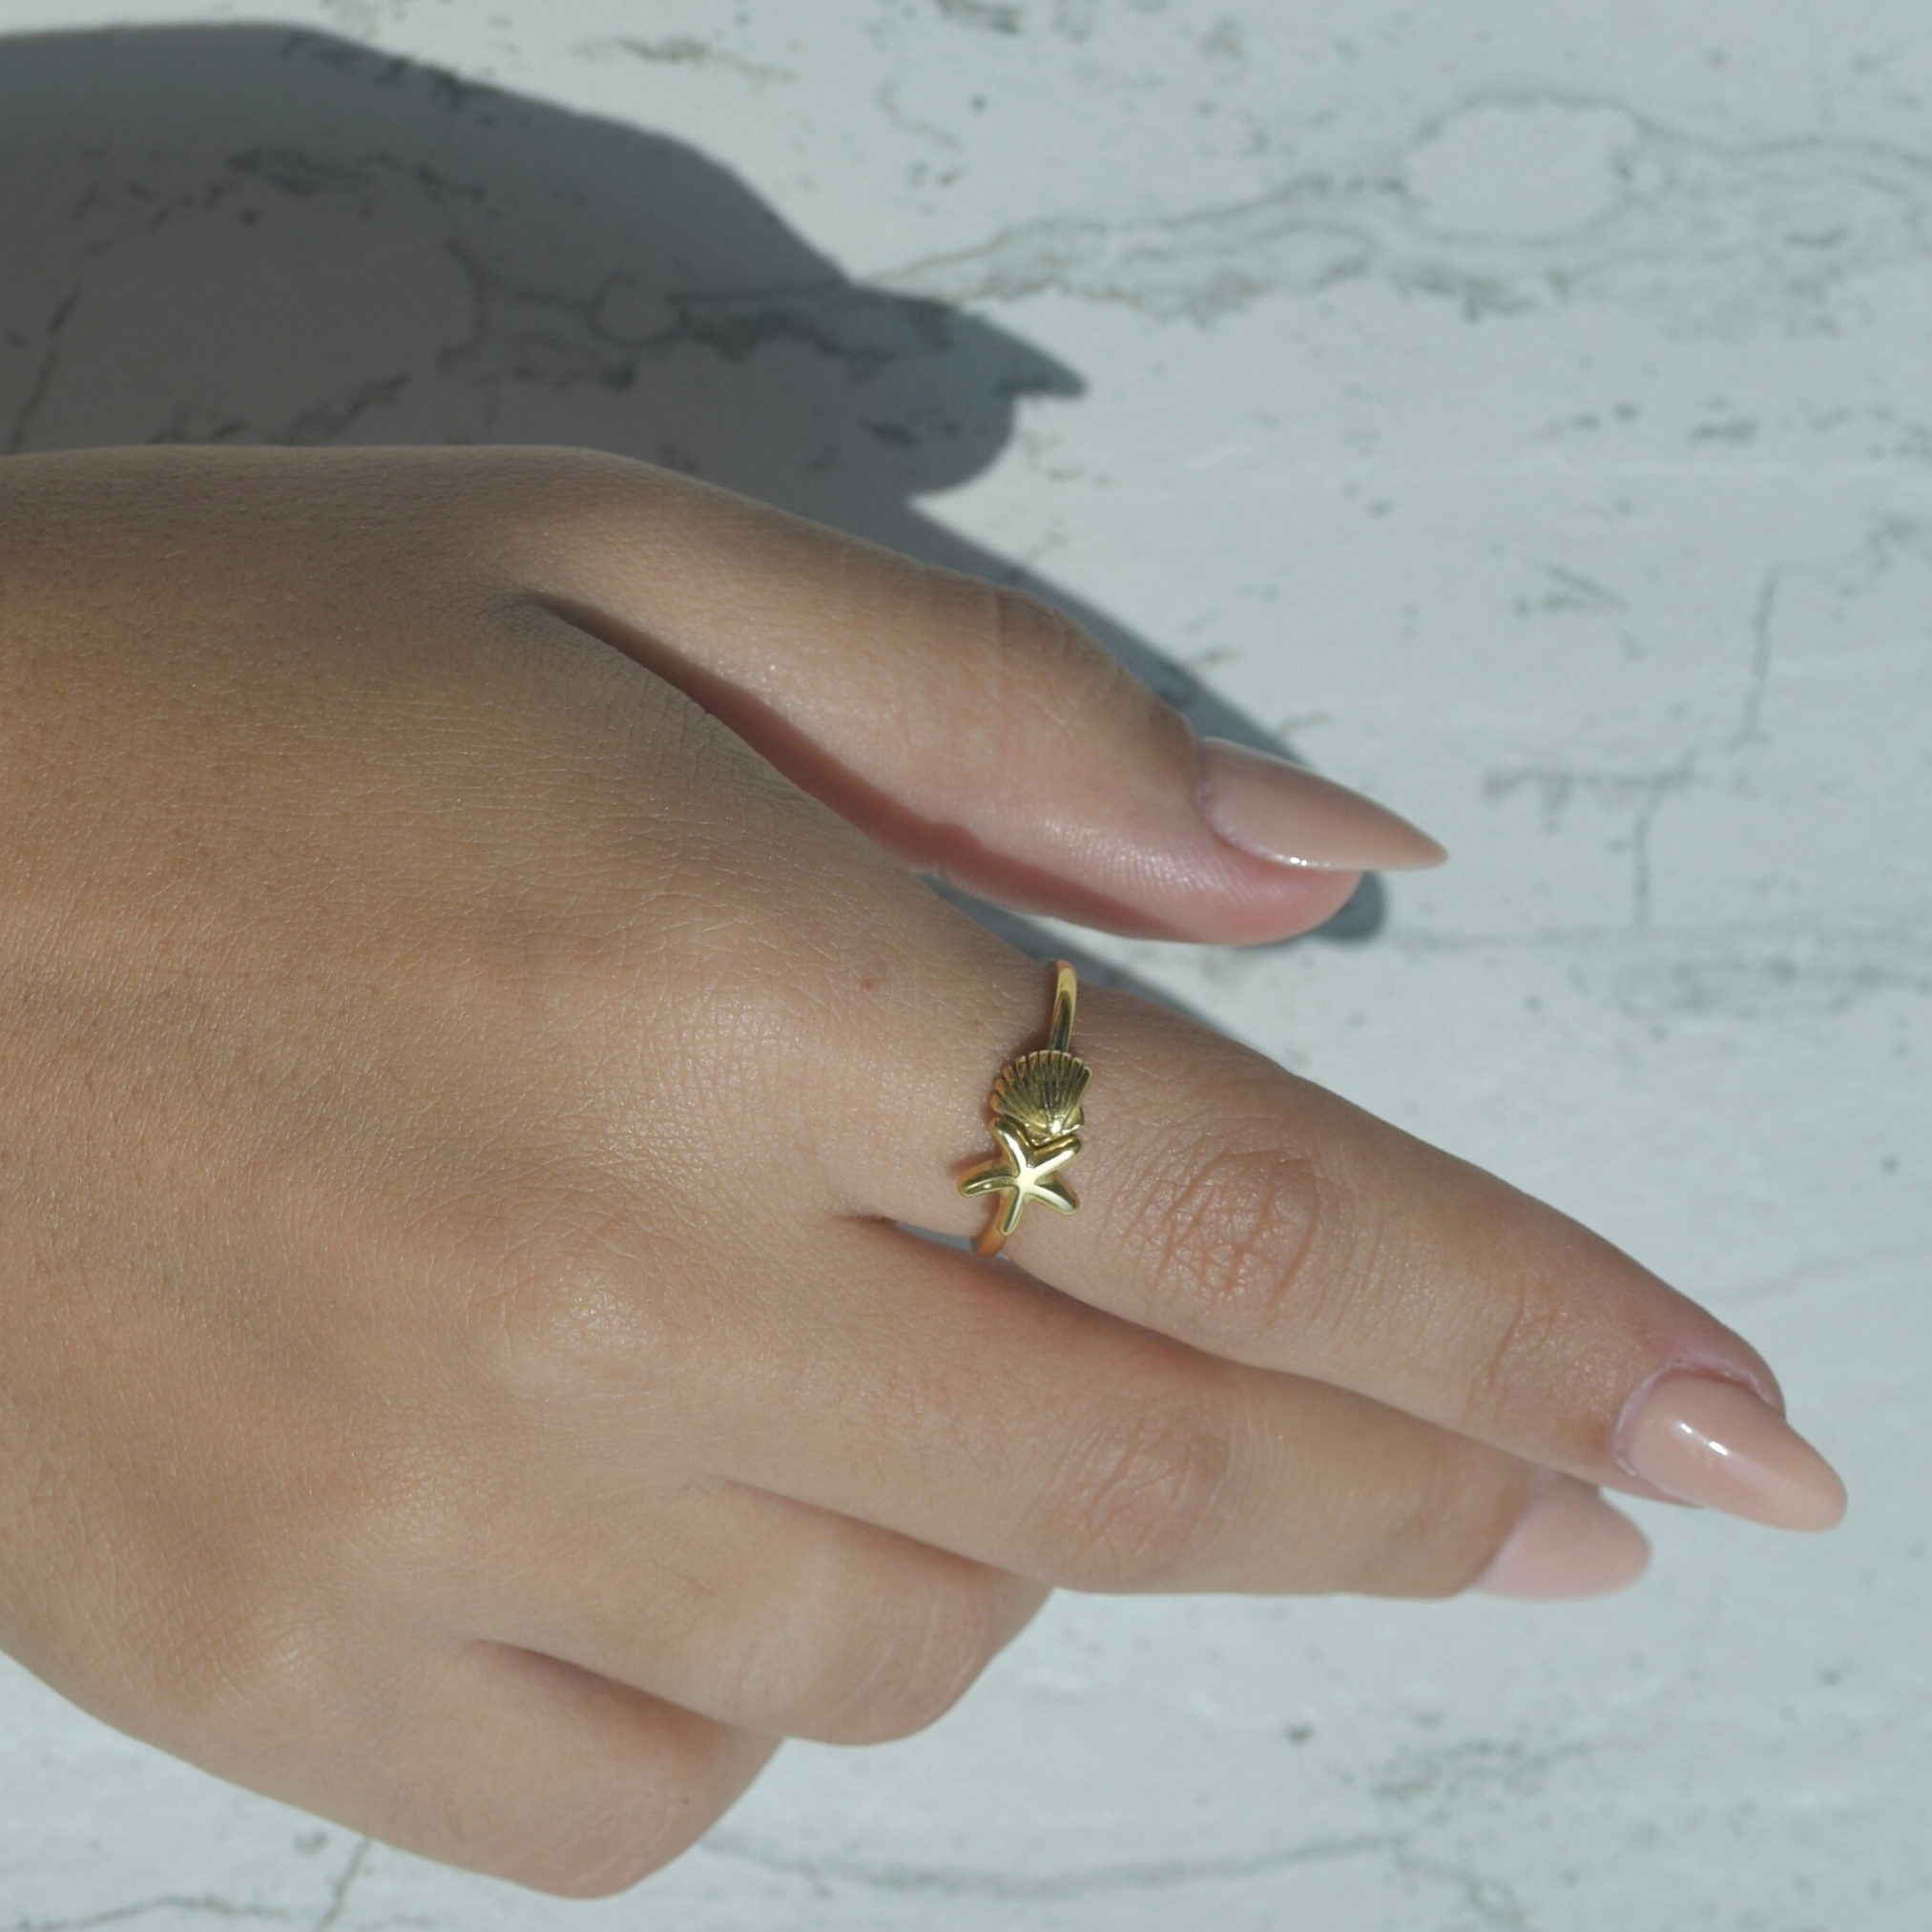 Gold plated ring. A star and a shell on the top of the halo ring. Elegant ring. Caribbean star shell gold ring.